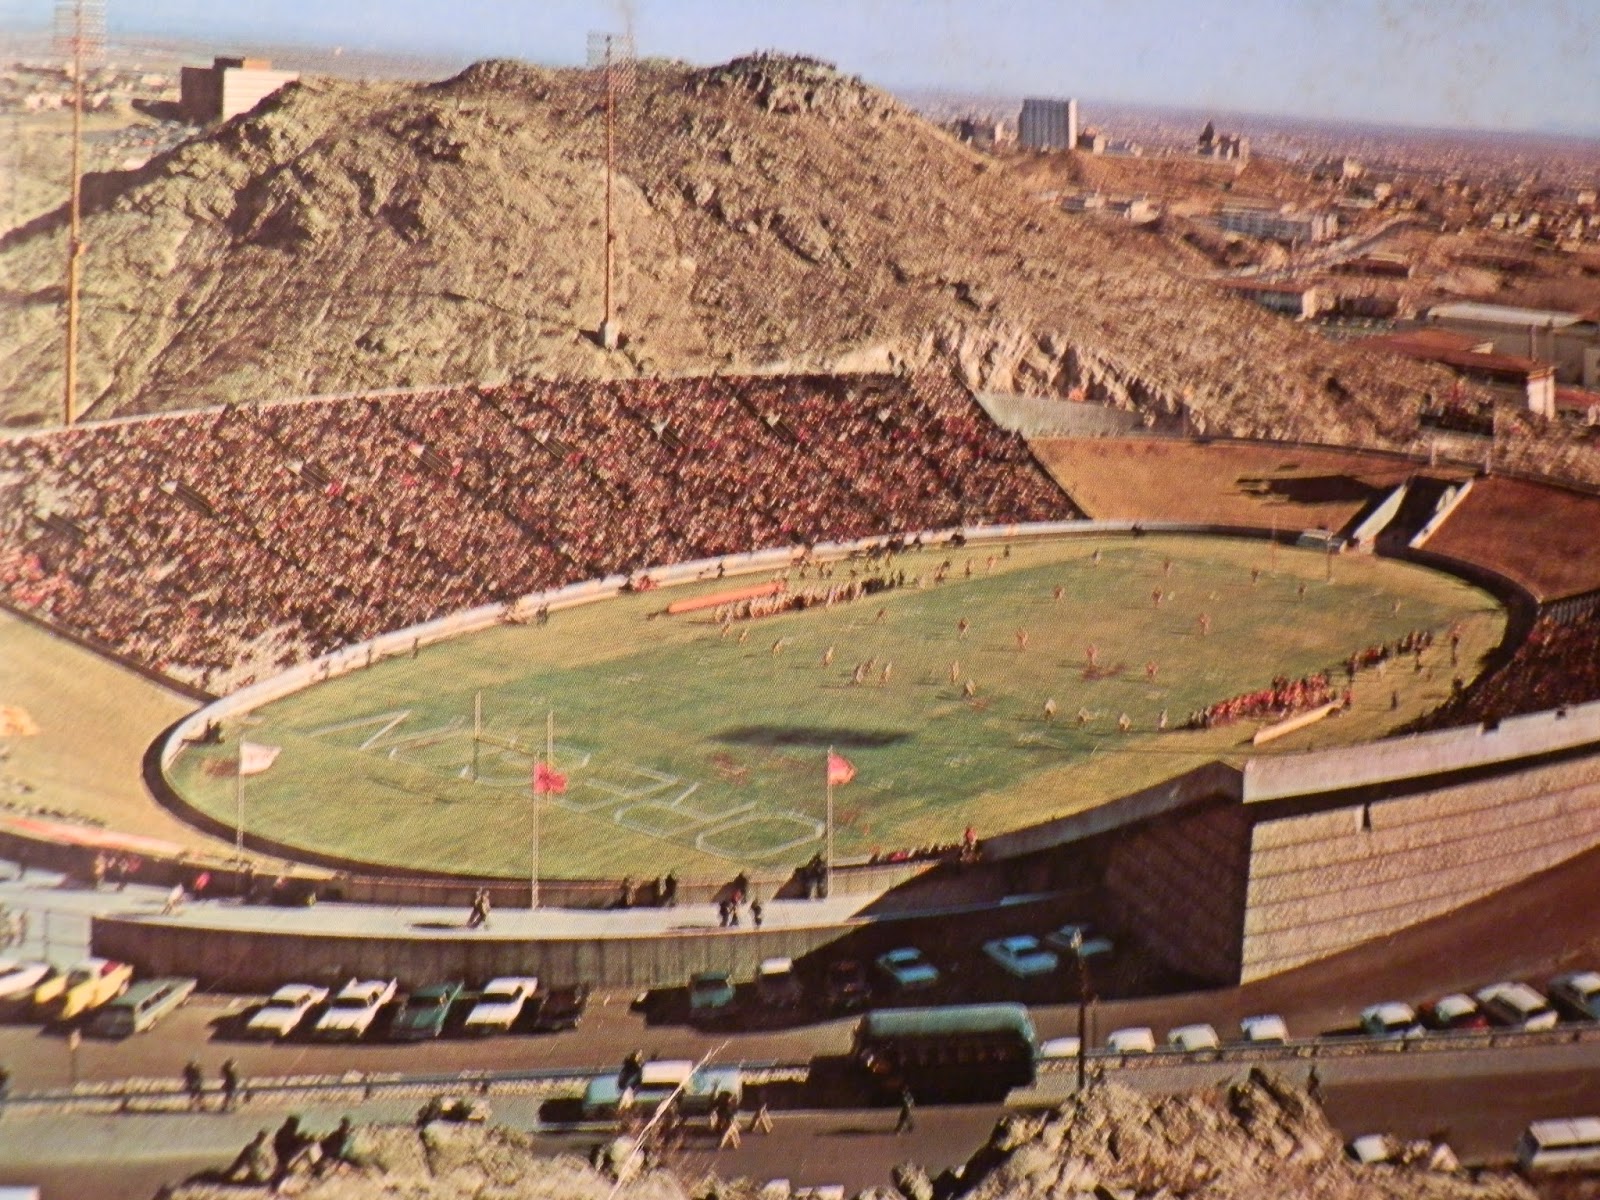 One Old Dawg The 1964 Sun Bowl and moving into a new era